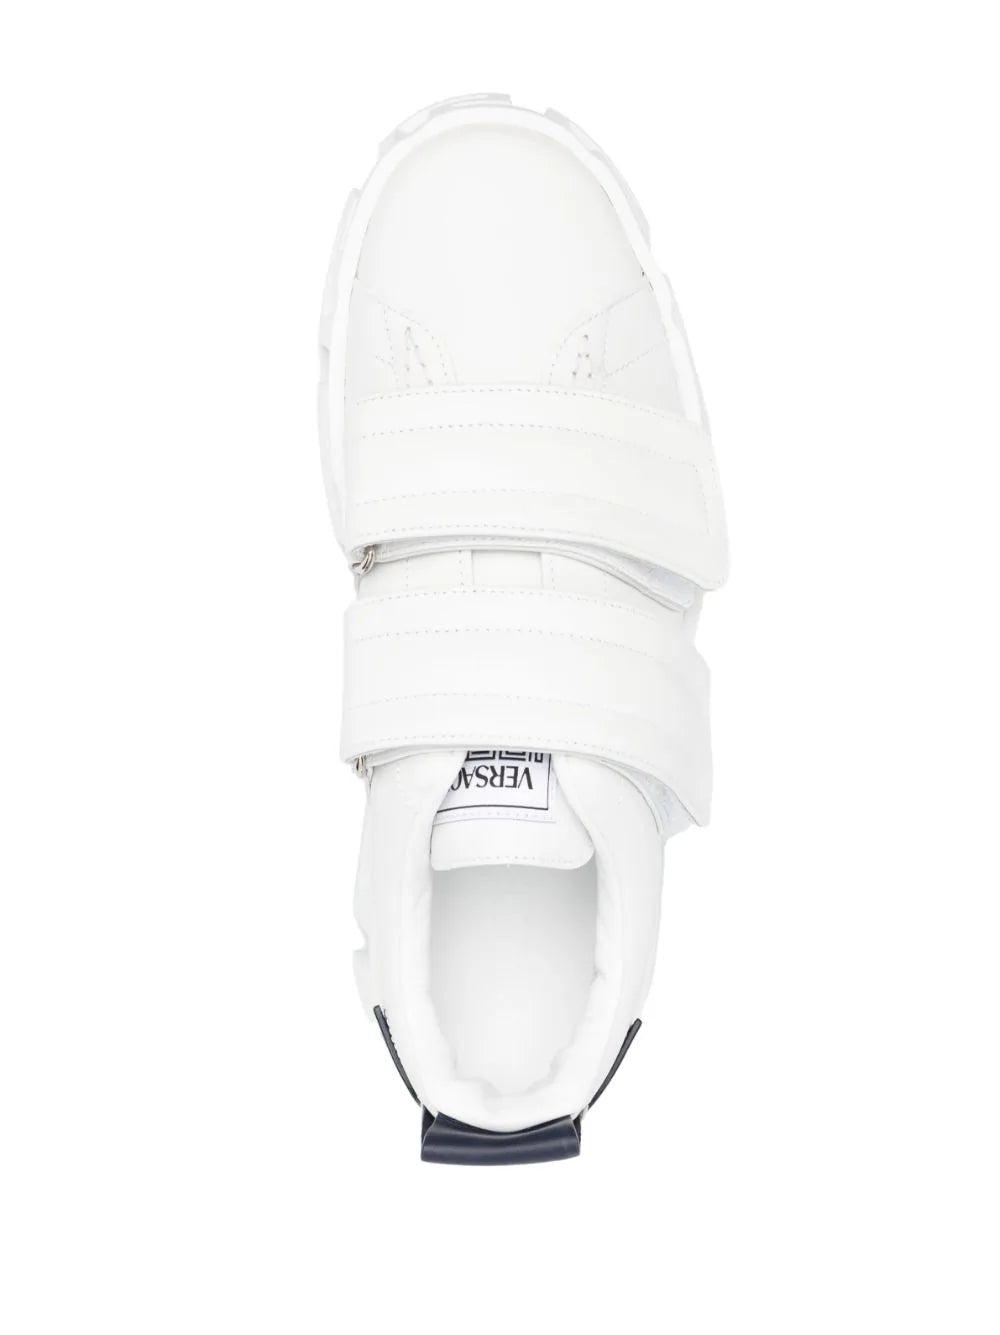 Versace Greca Labyrinth Low-Top Sneakers White